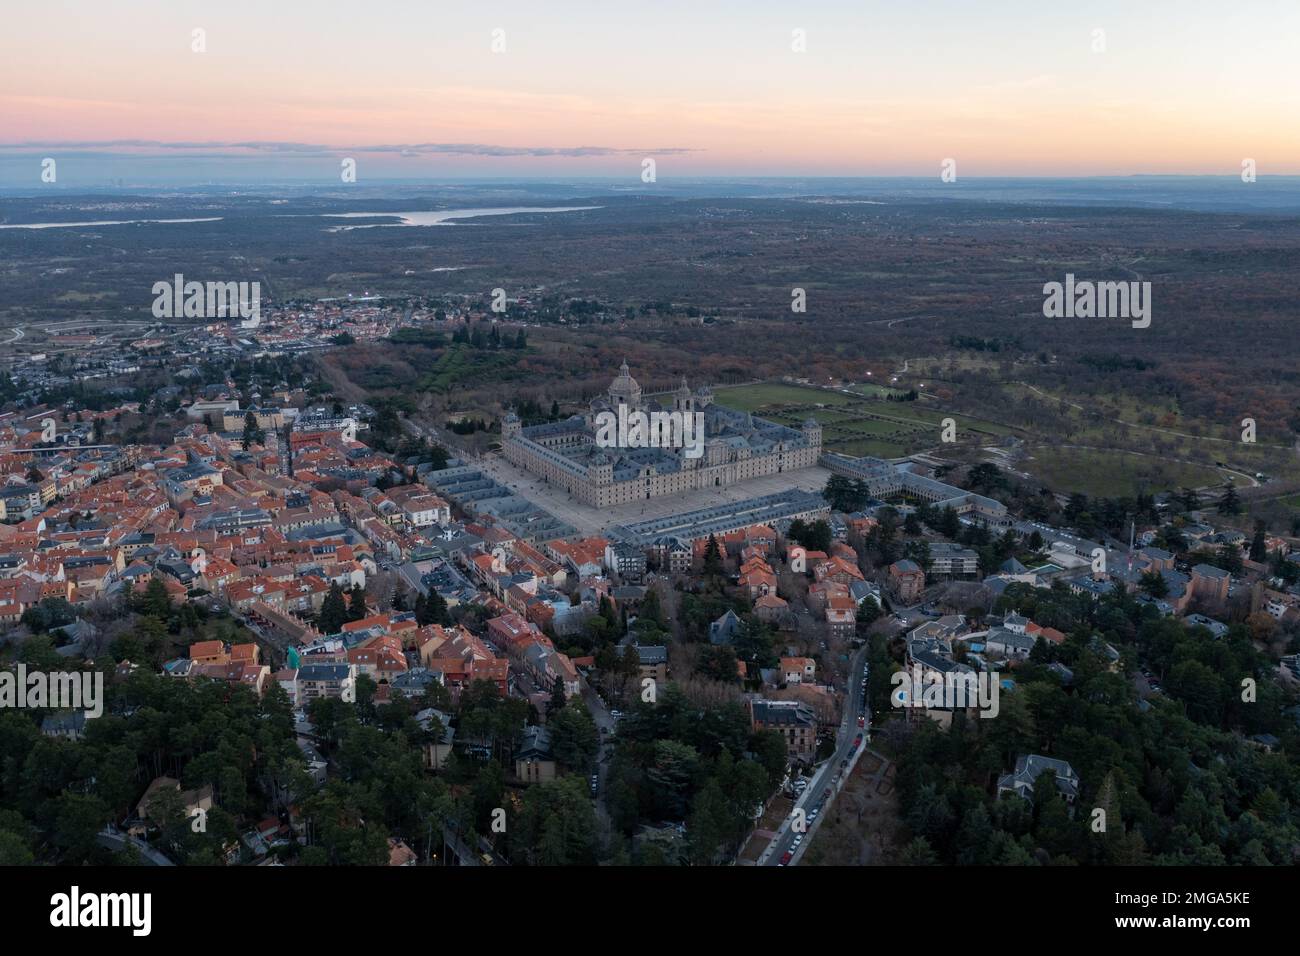 View of the impressive monastery of El Escorial at sunset, a world heritage site in Spain. Stock Photo